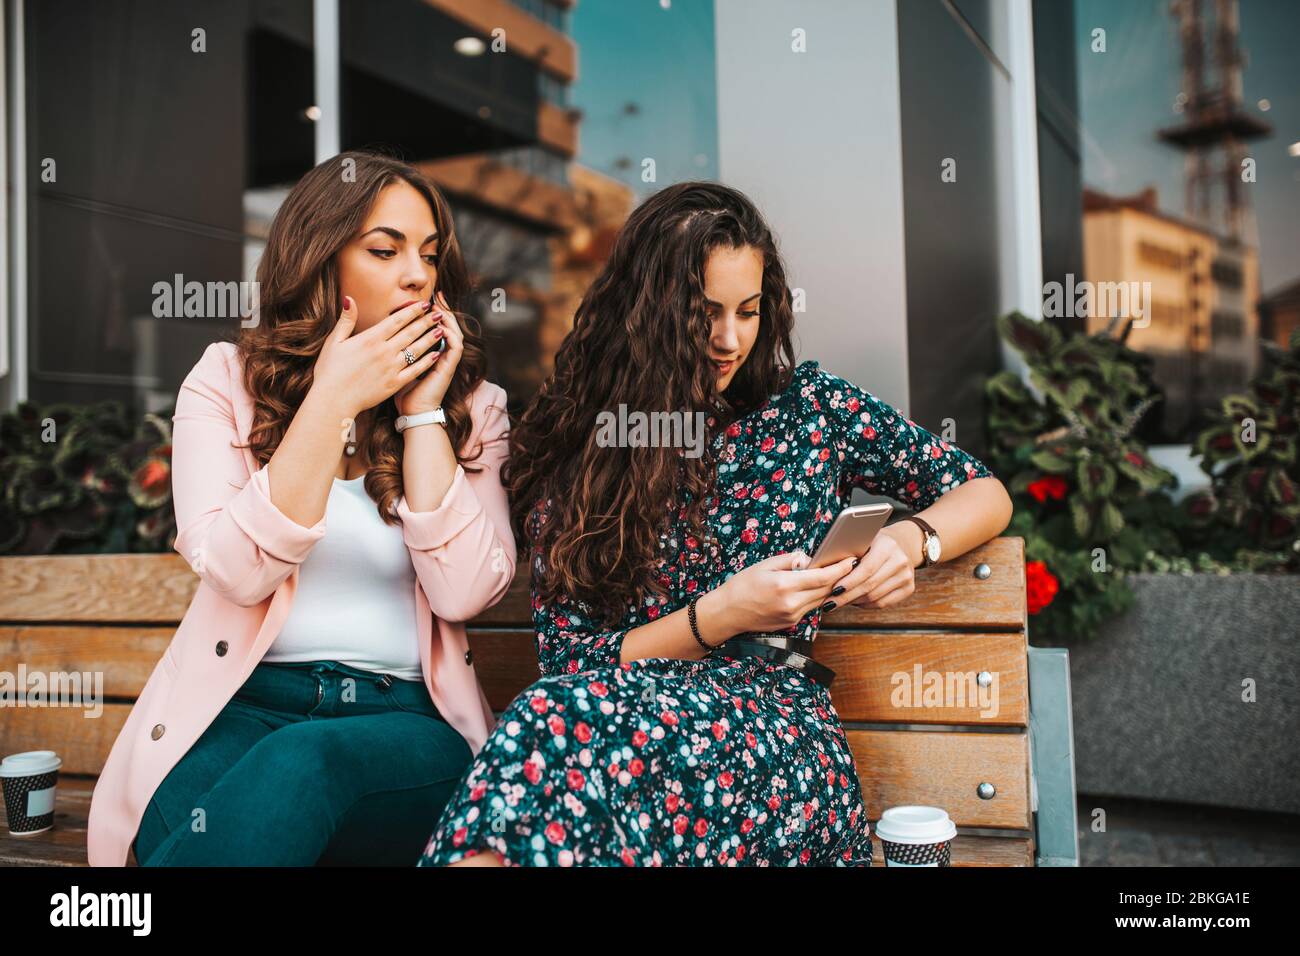 Image of curious woman spying and peeping at smartphone of her friend, while talking on mobile phone and sitting on the bench in the city street Stock Photo